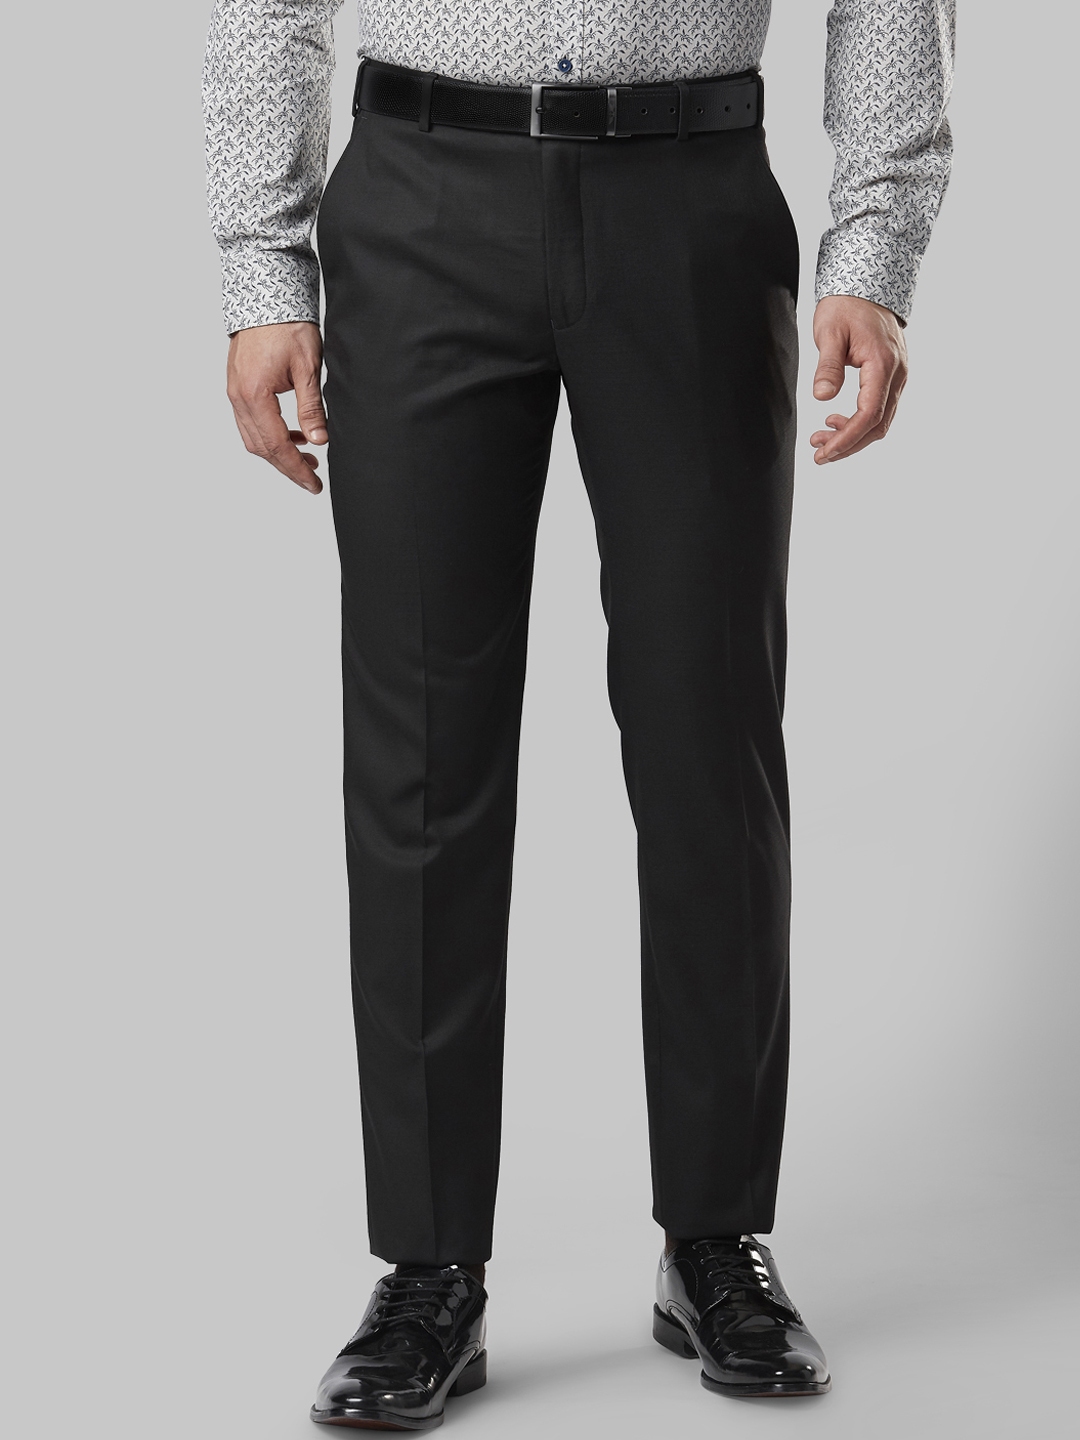 Buy Next Look Men Black Slim Fit Solid Formal Trousers - Trousers for ...